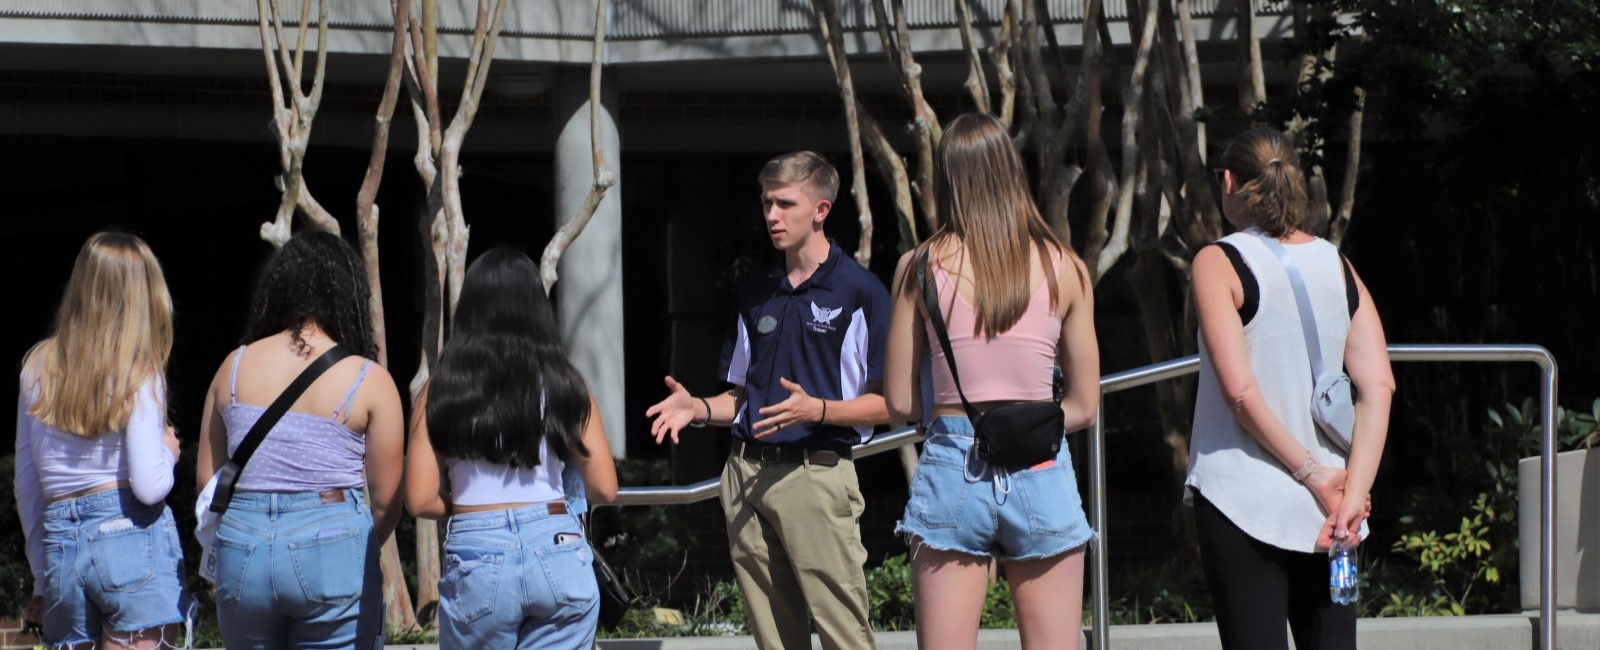 A UNF student tour guide talking to a tour group.